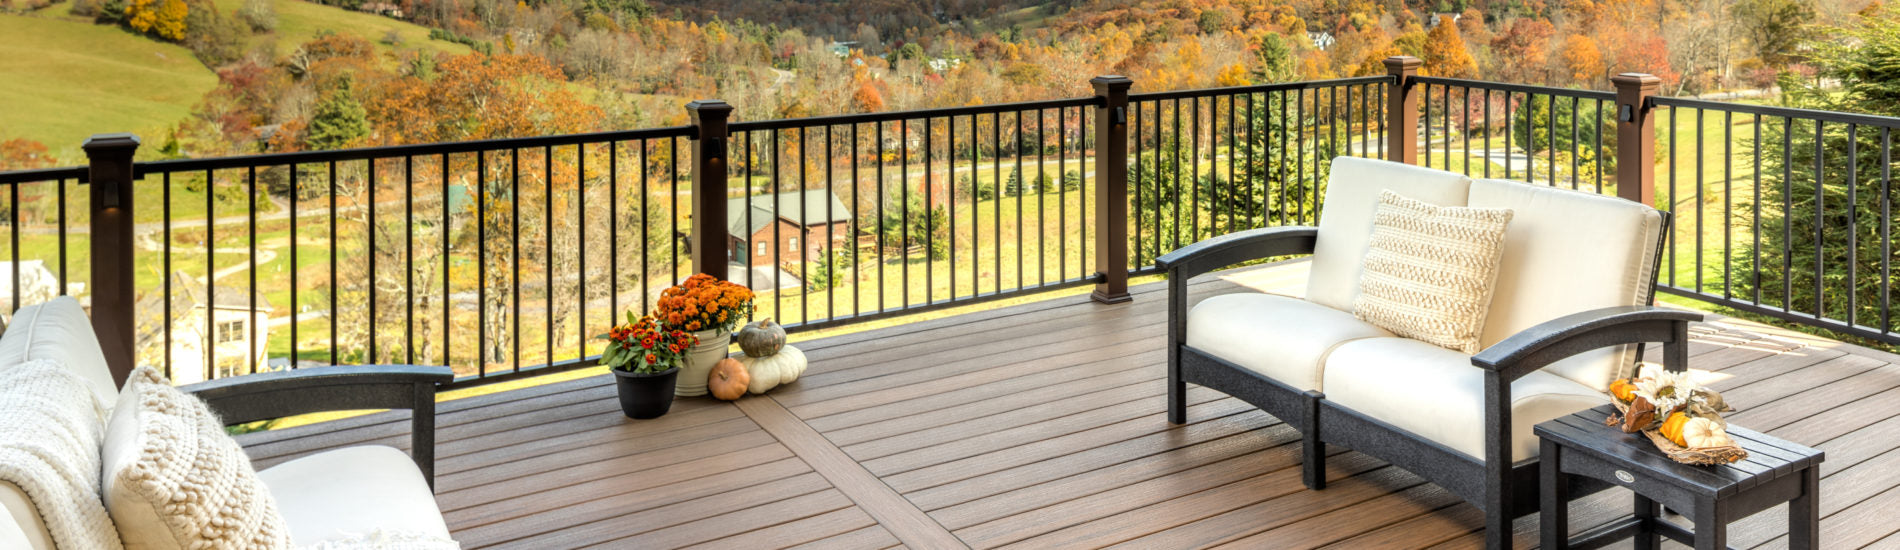 sitting_area_fall_decor and brown deck